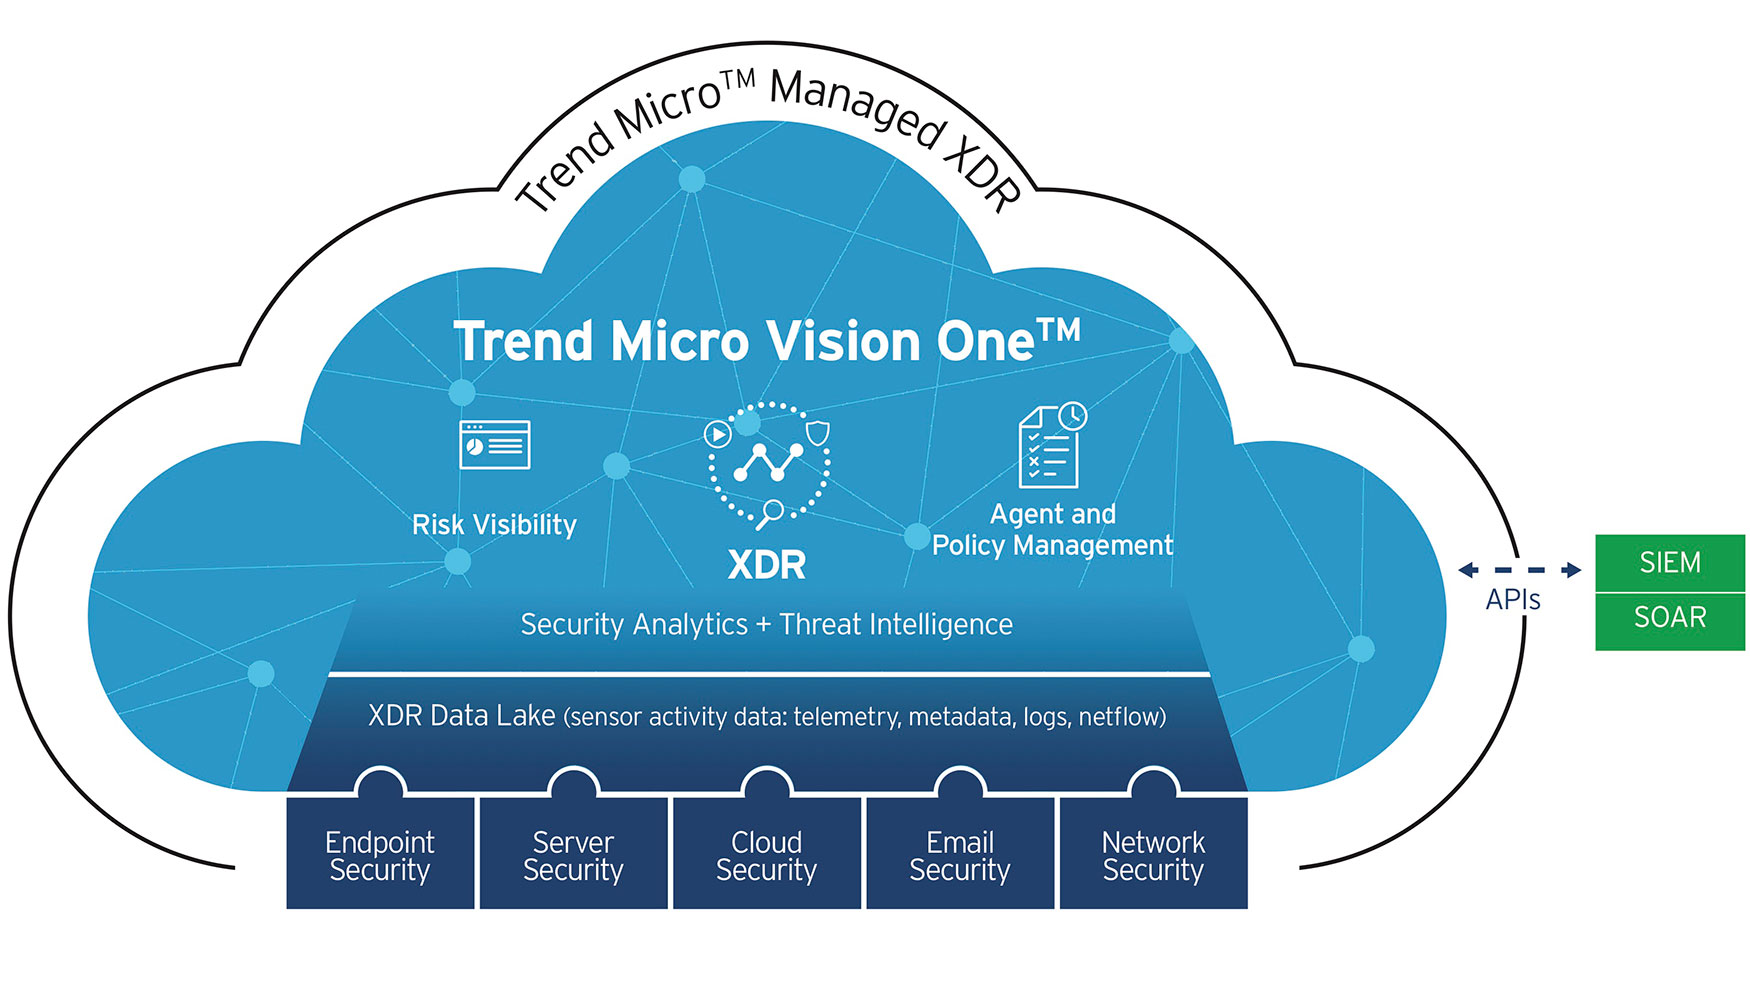 Trend Micro Vision One